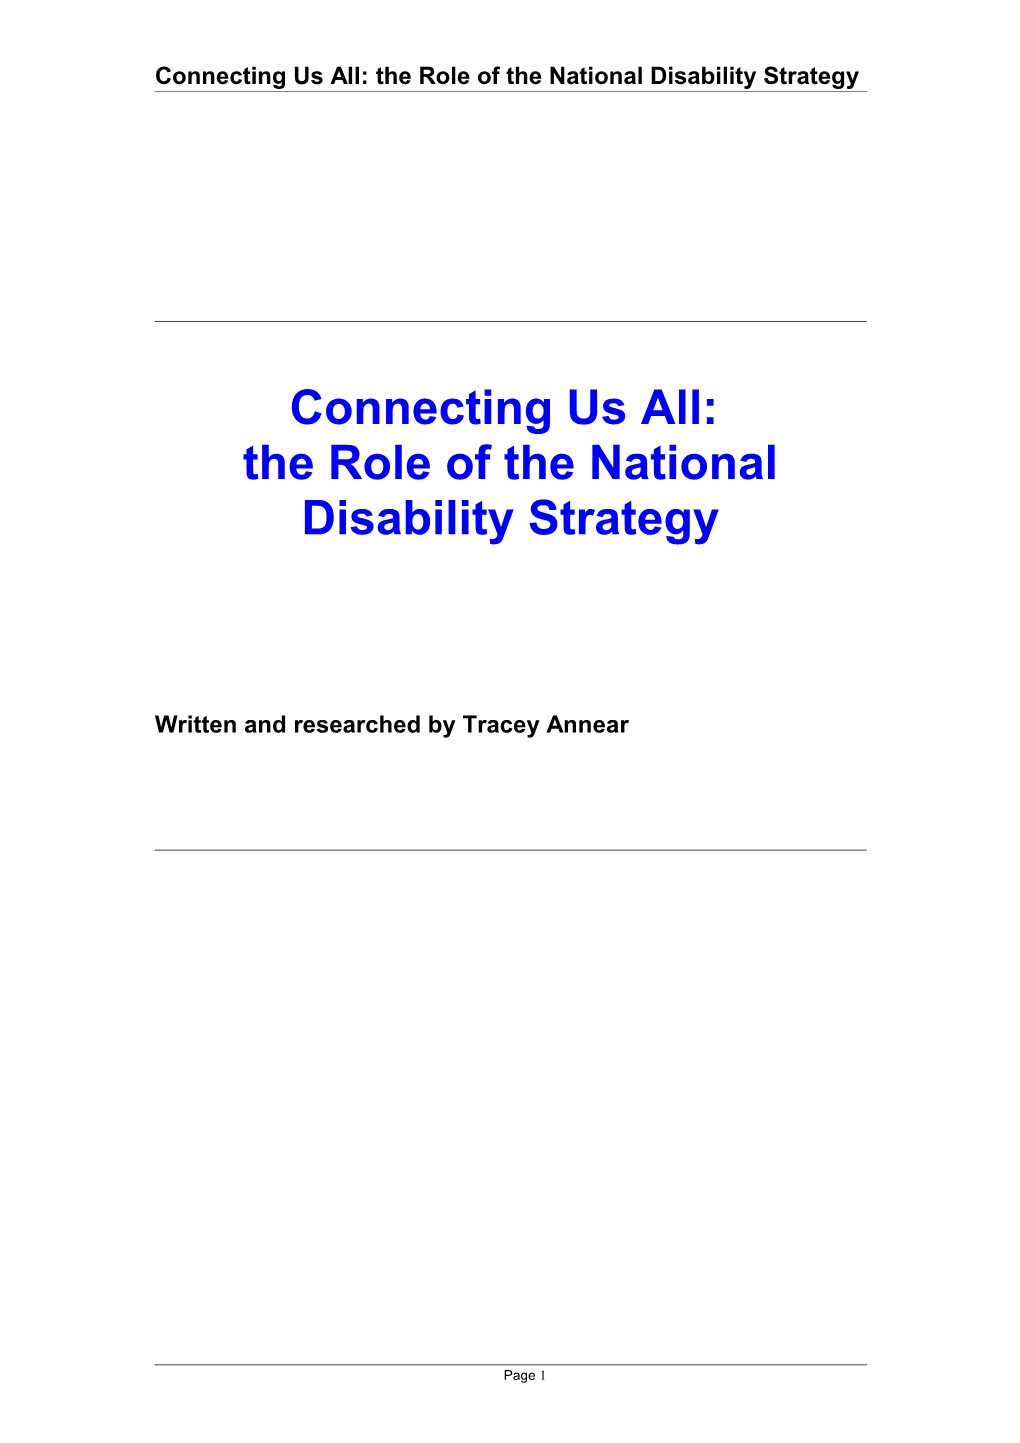 Connecting Us All: the Role of the National Disability Strategy